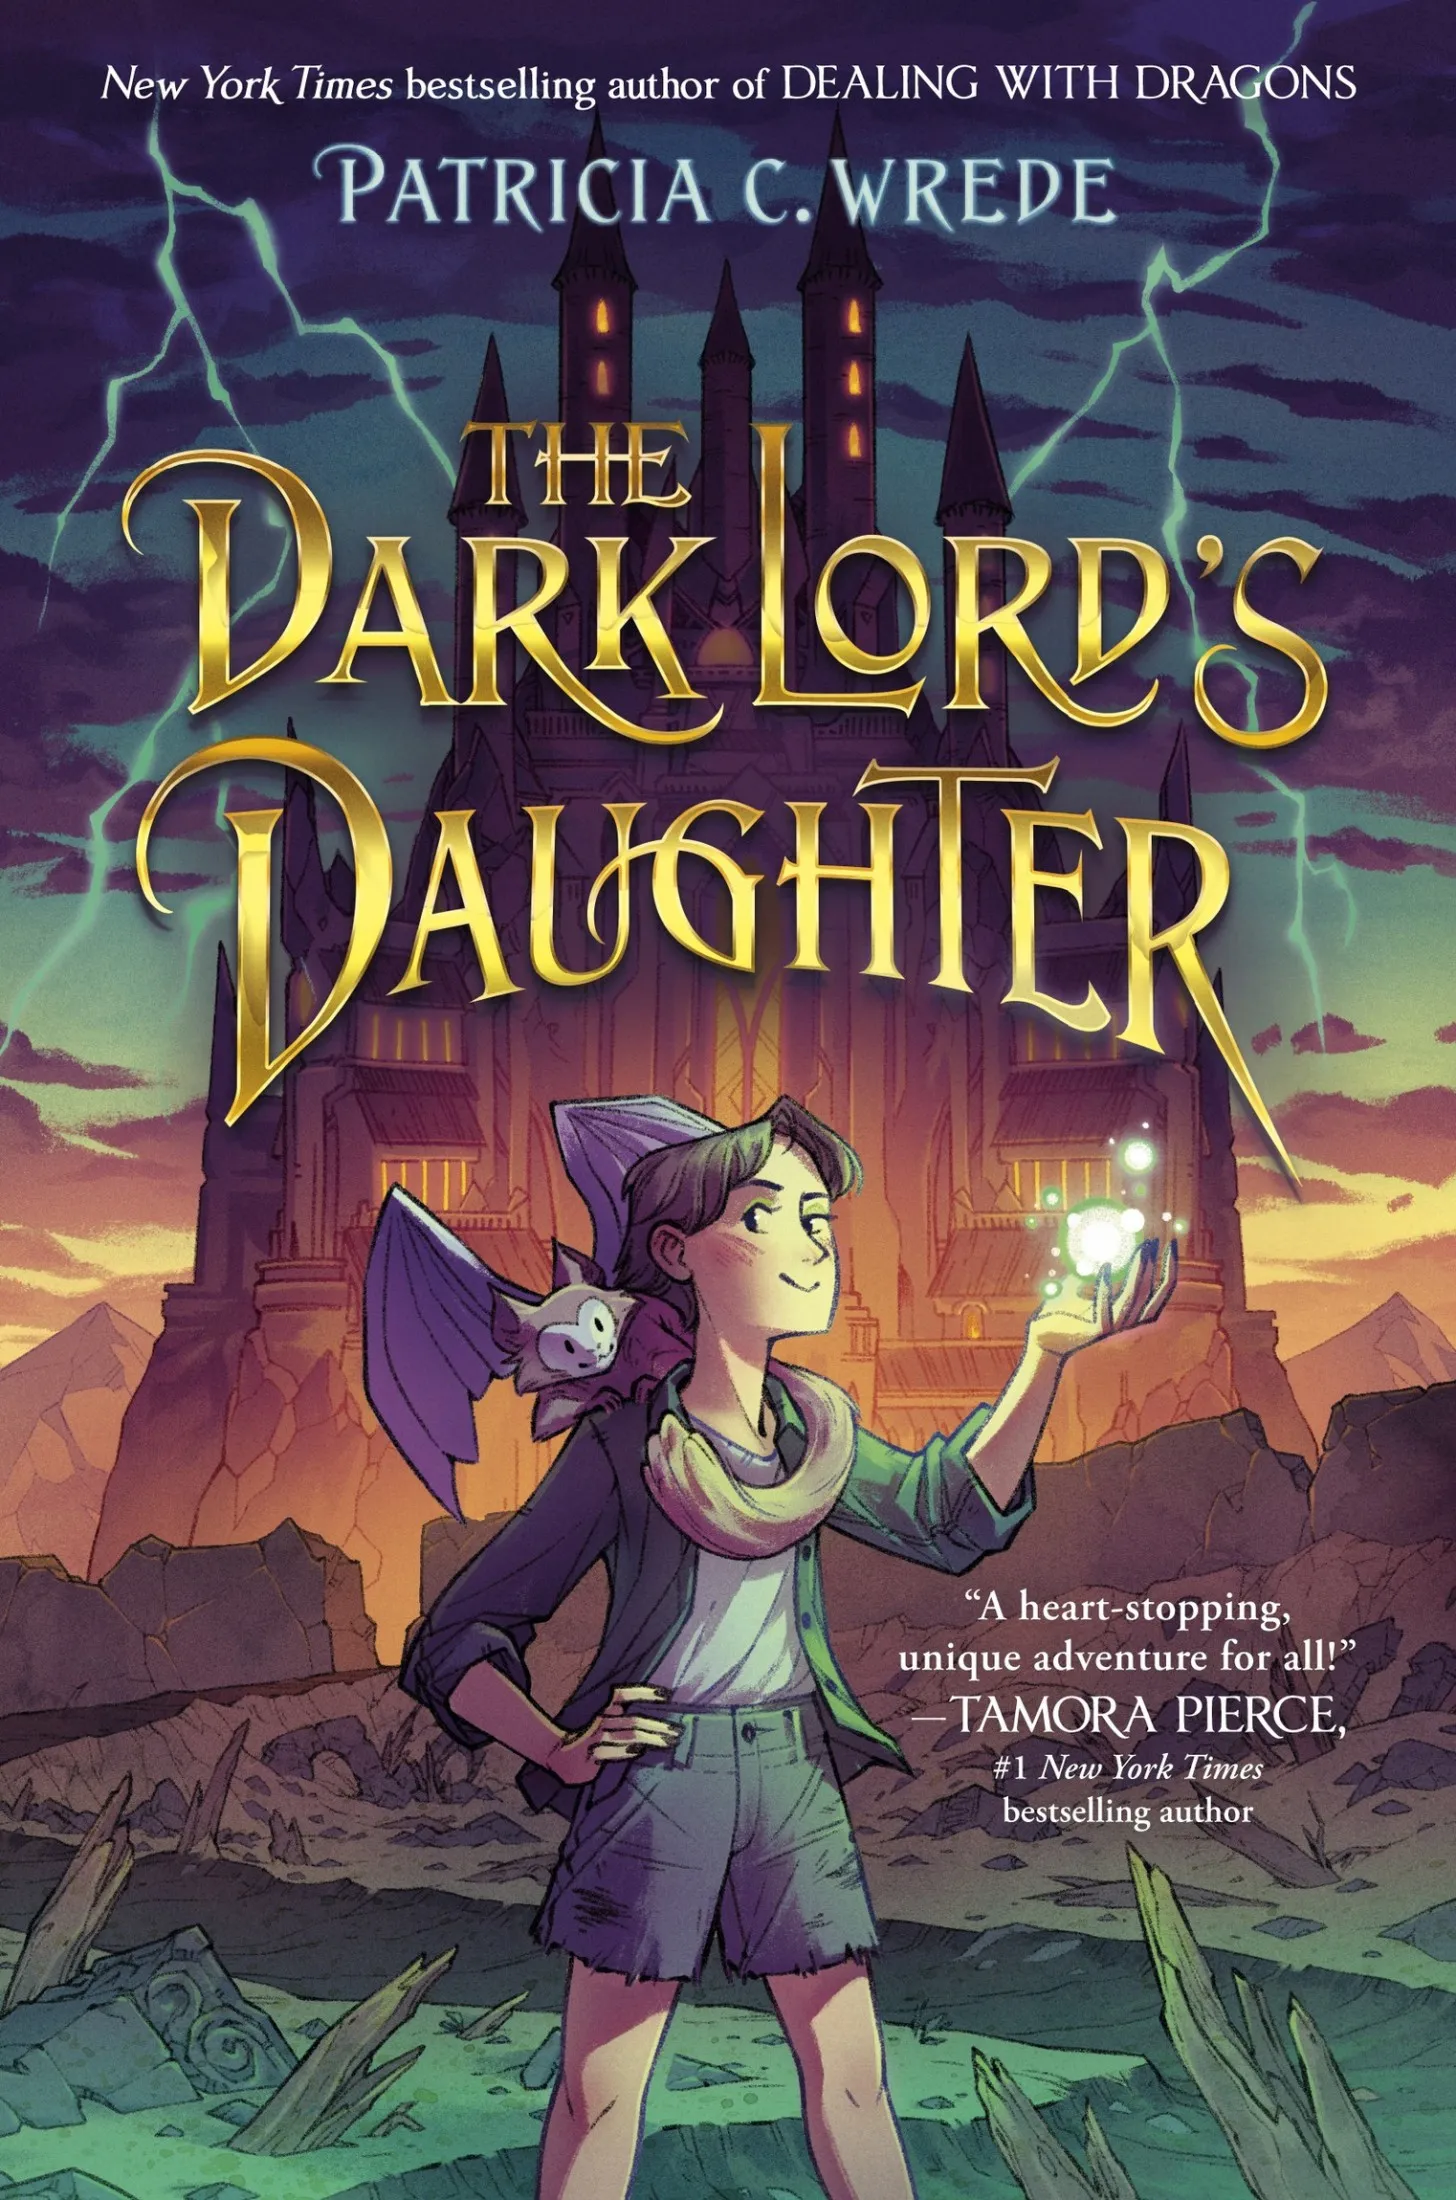 The Dark Lord's Daughter (The Dark Lord's Daughter #1)